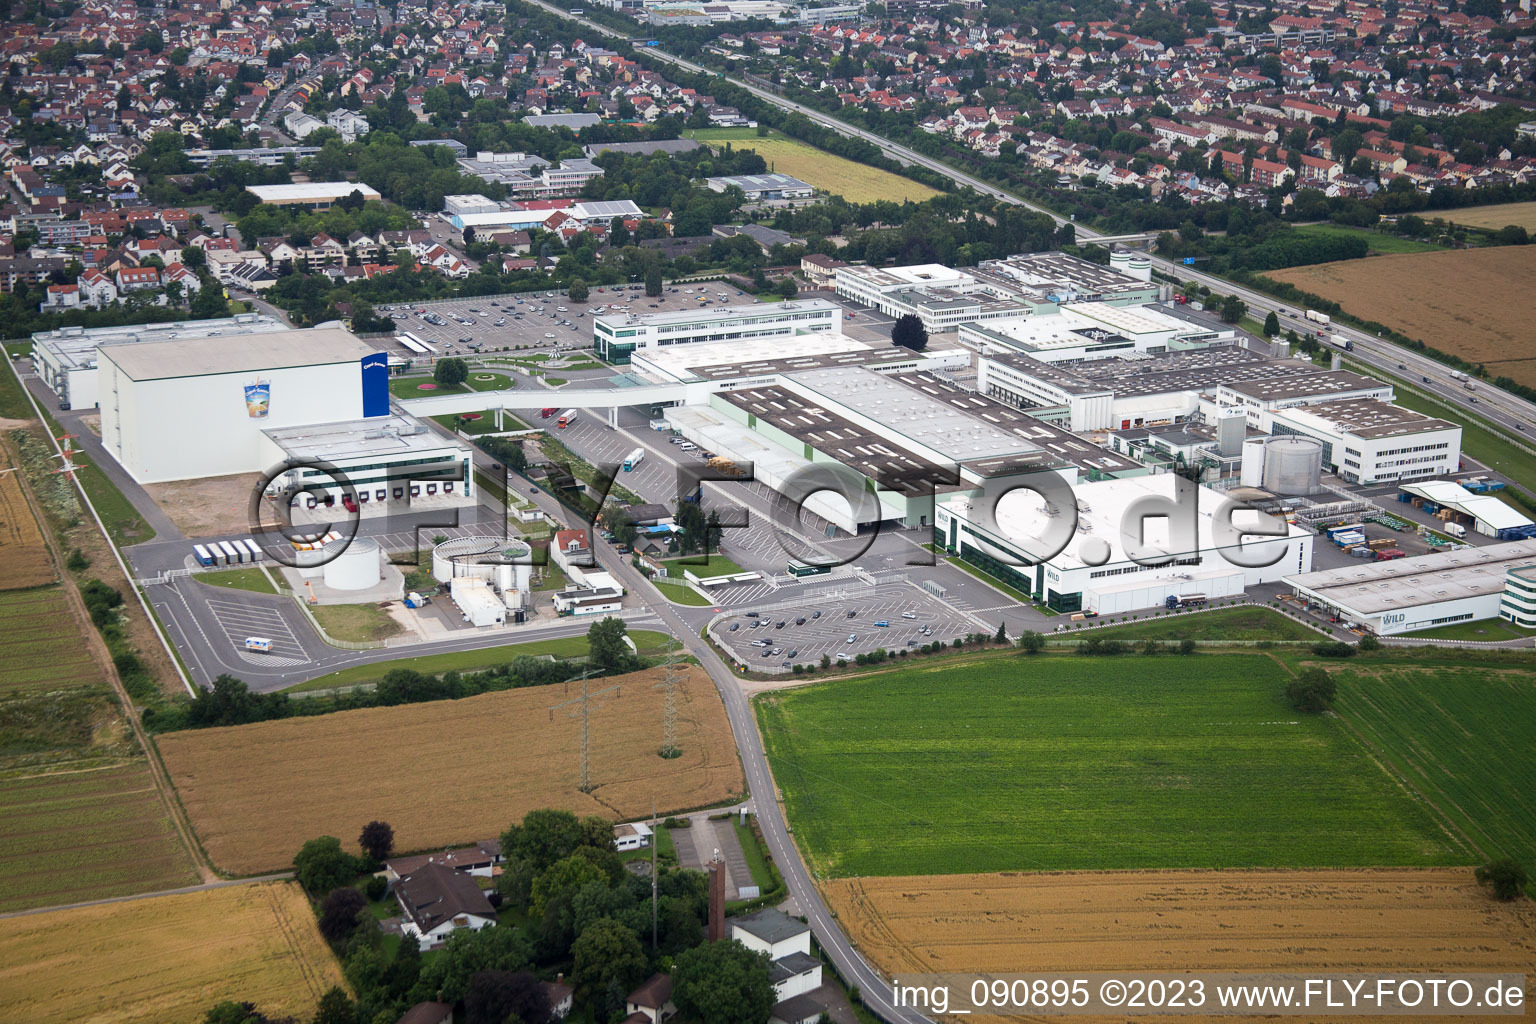 Aerial view of Wild works in Eppelheim in the state Baden-Wuerttemberg, Germany